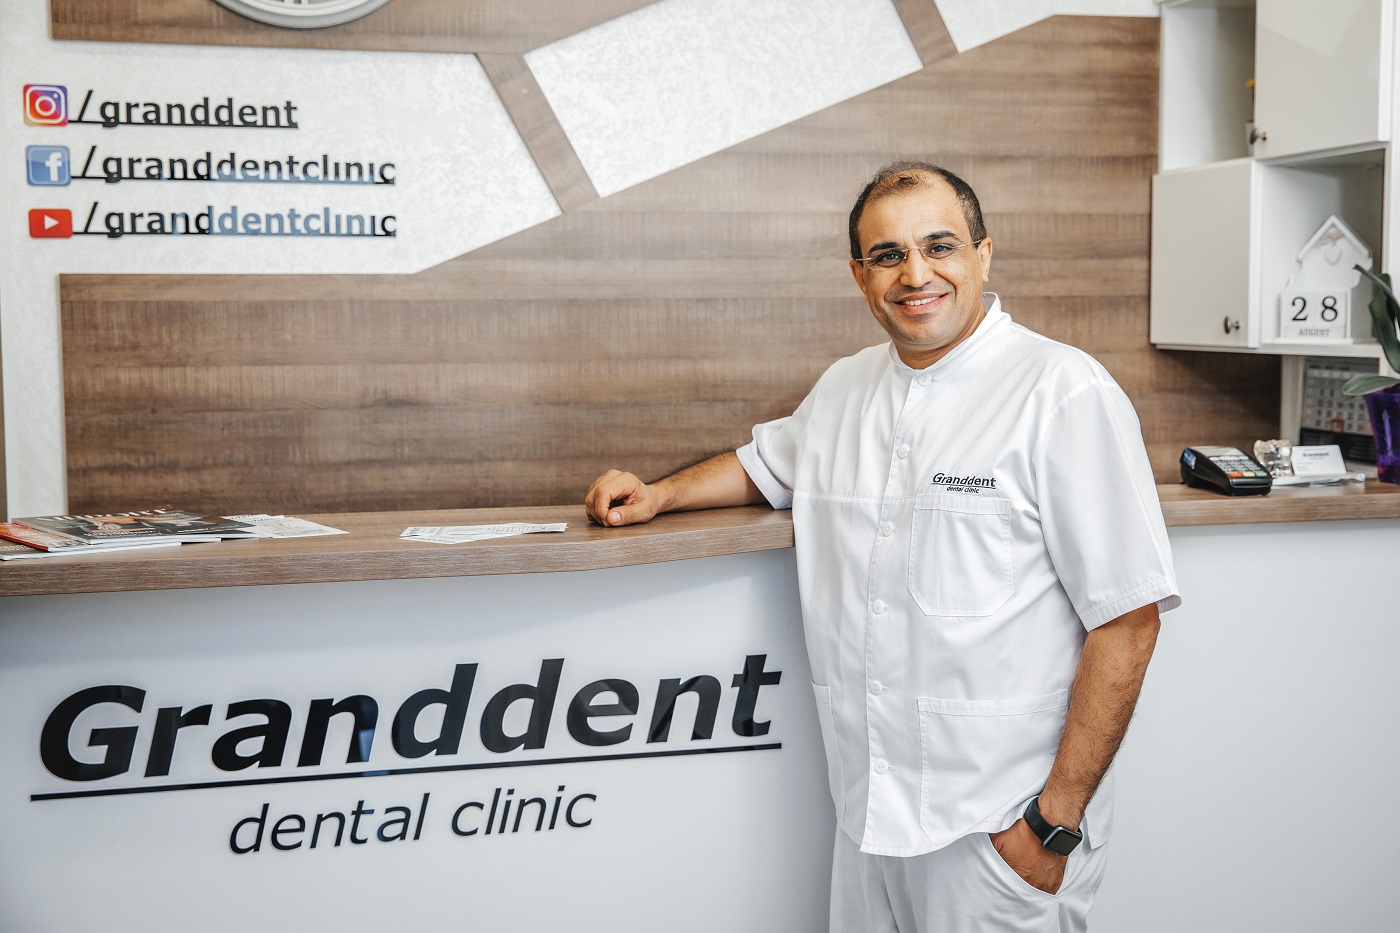 Chief Physician Dental Clinic Granddent